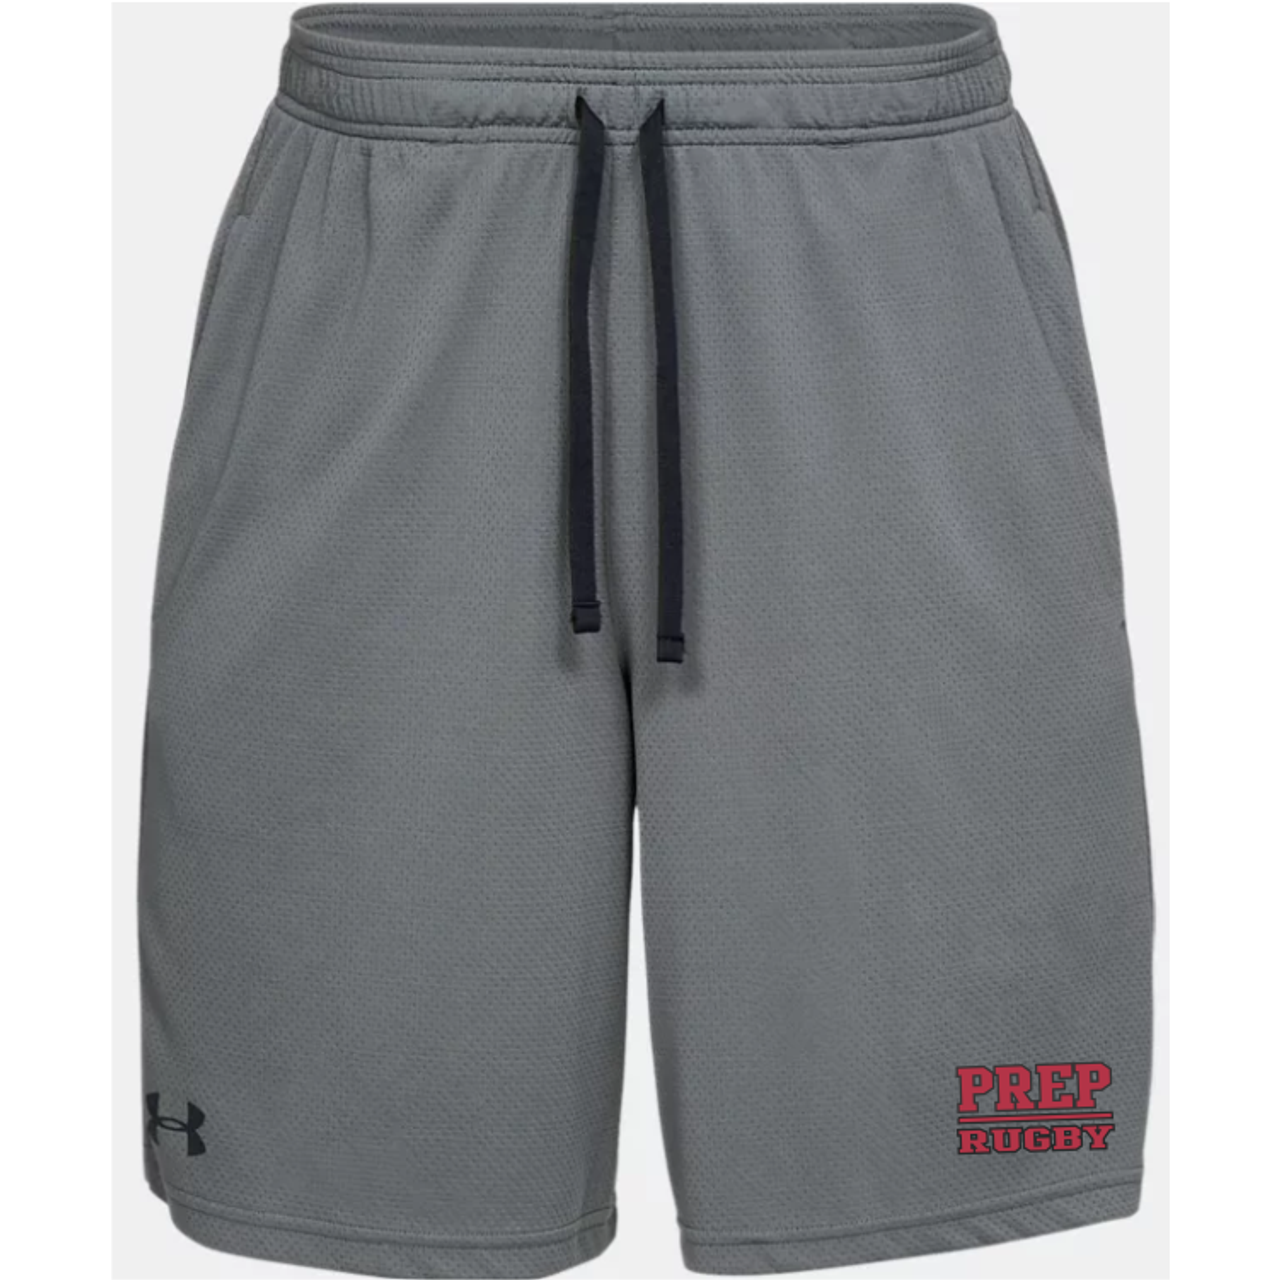 St. Joseph's Prep Rugby 9" Under Armour Mesh Shorts, Gray